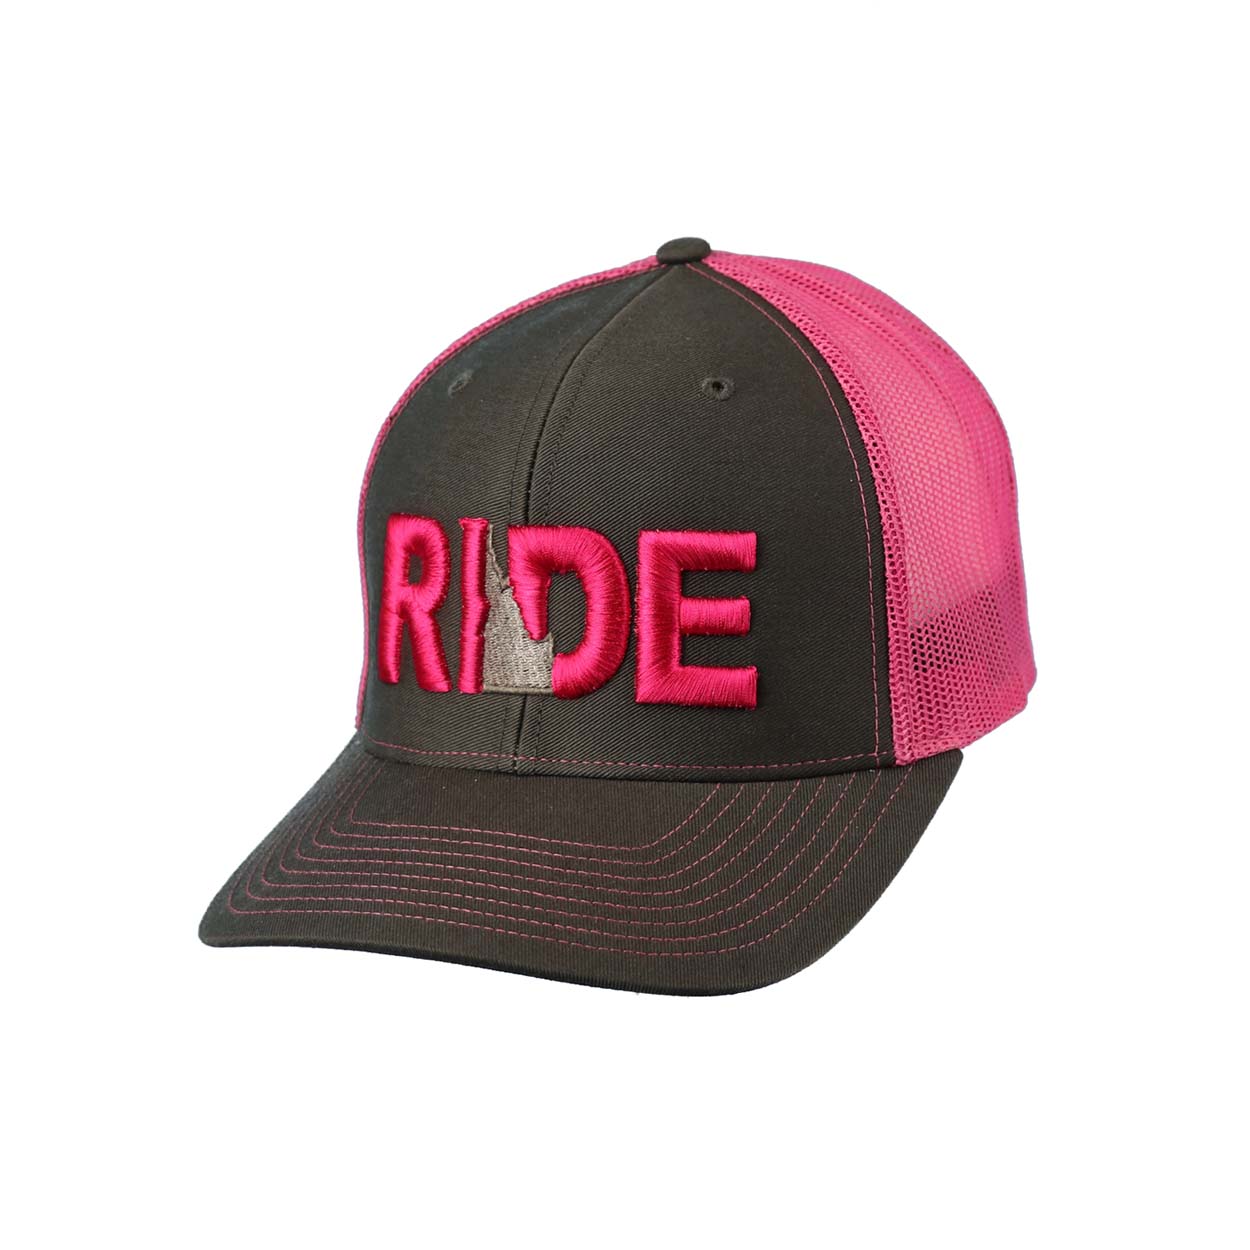 Ride Idaho Classic Embroidered Snapback Trucker Hat Gray/Pink